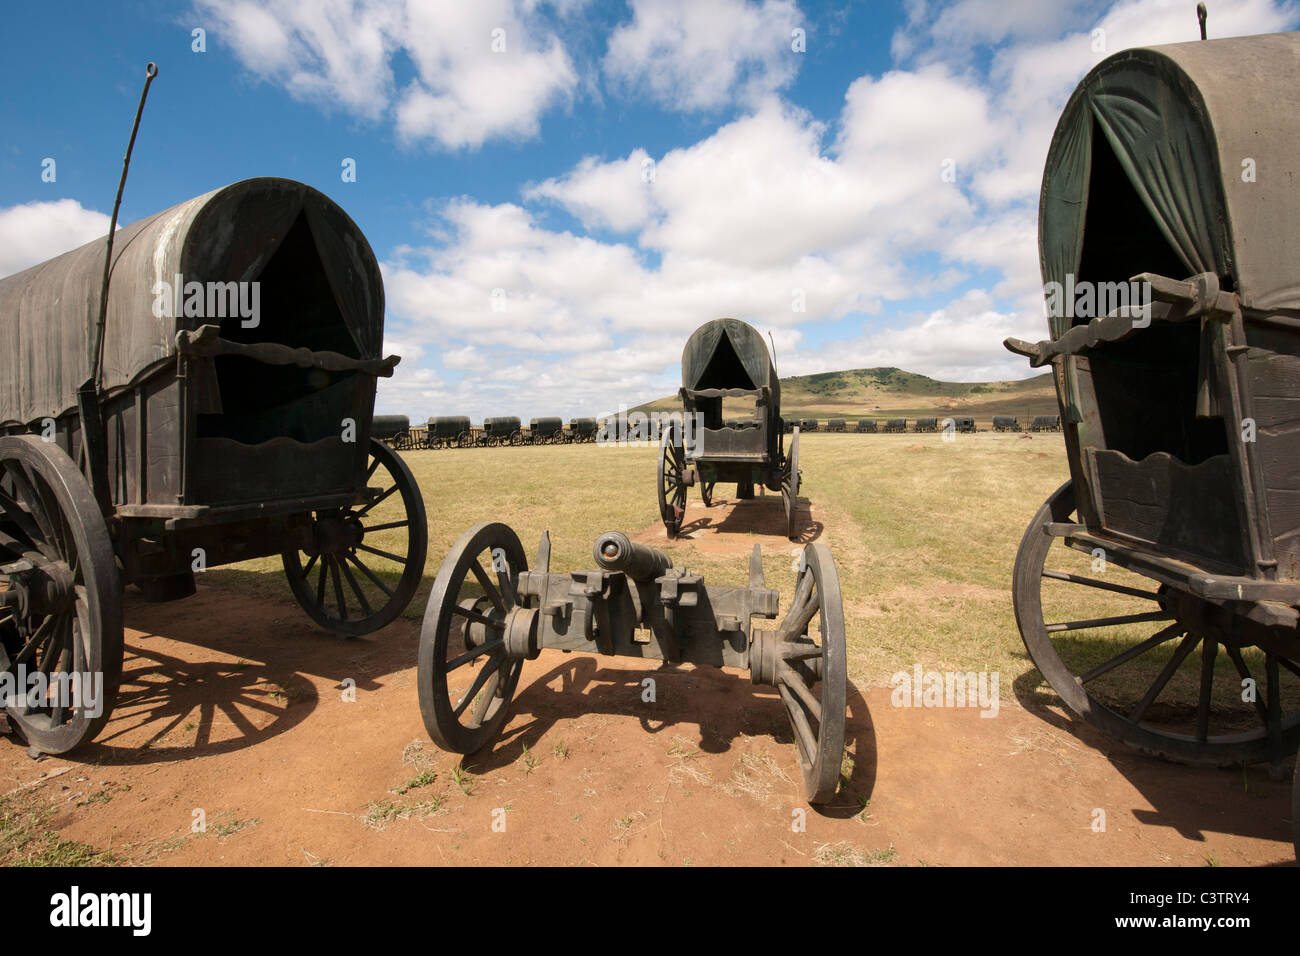 Laager with bronze replicas of ox-wagons used by Voortrekkers at the Battle of Blood River, Blood River museum, South Africa Stock Photo